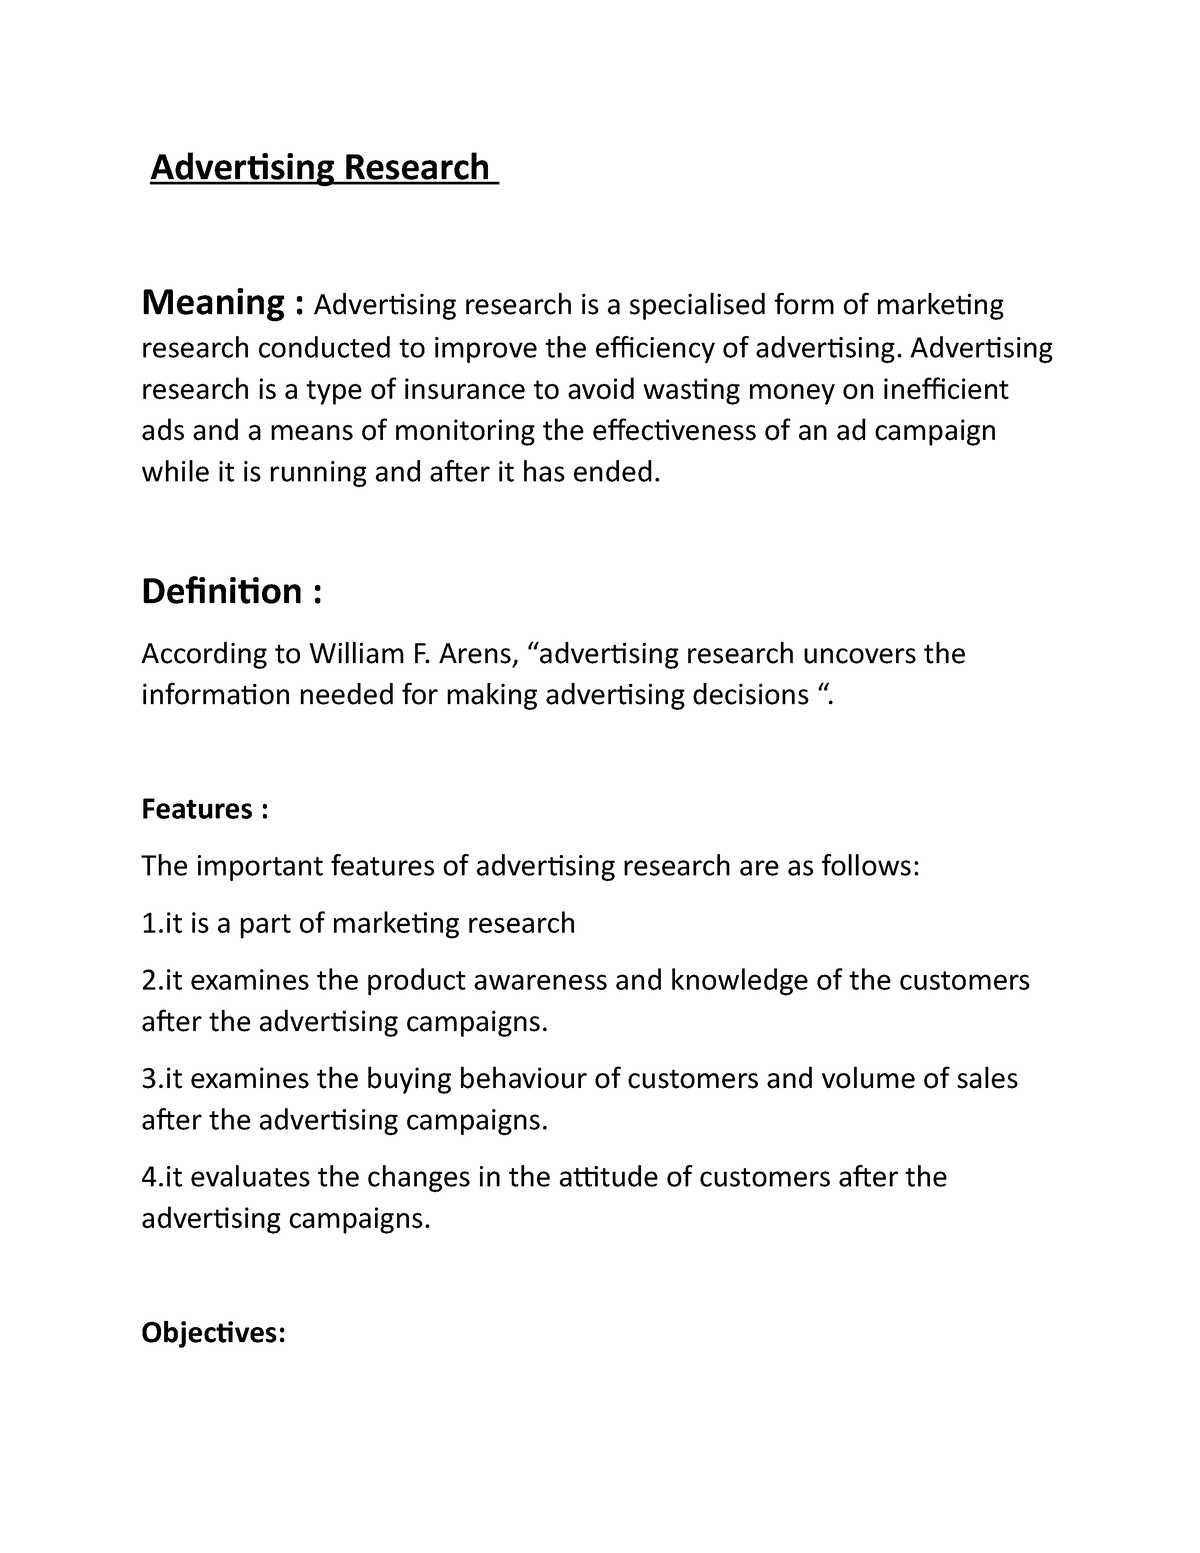 advertising research definition